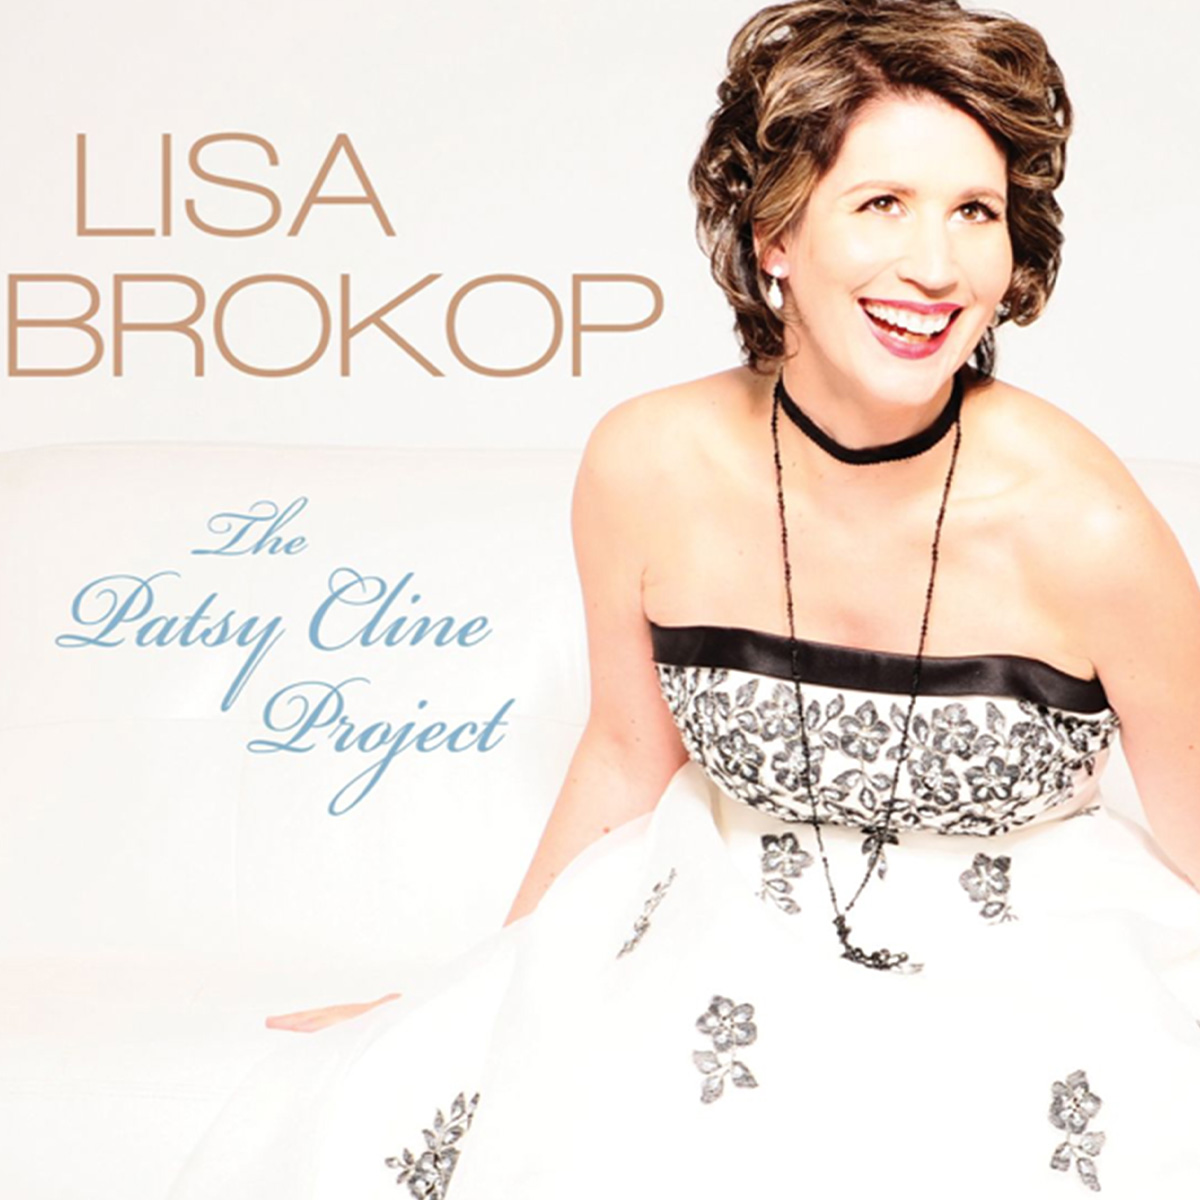 The Patsy Cline Project